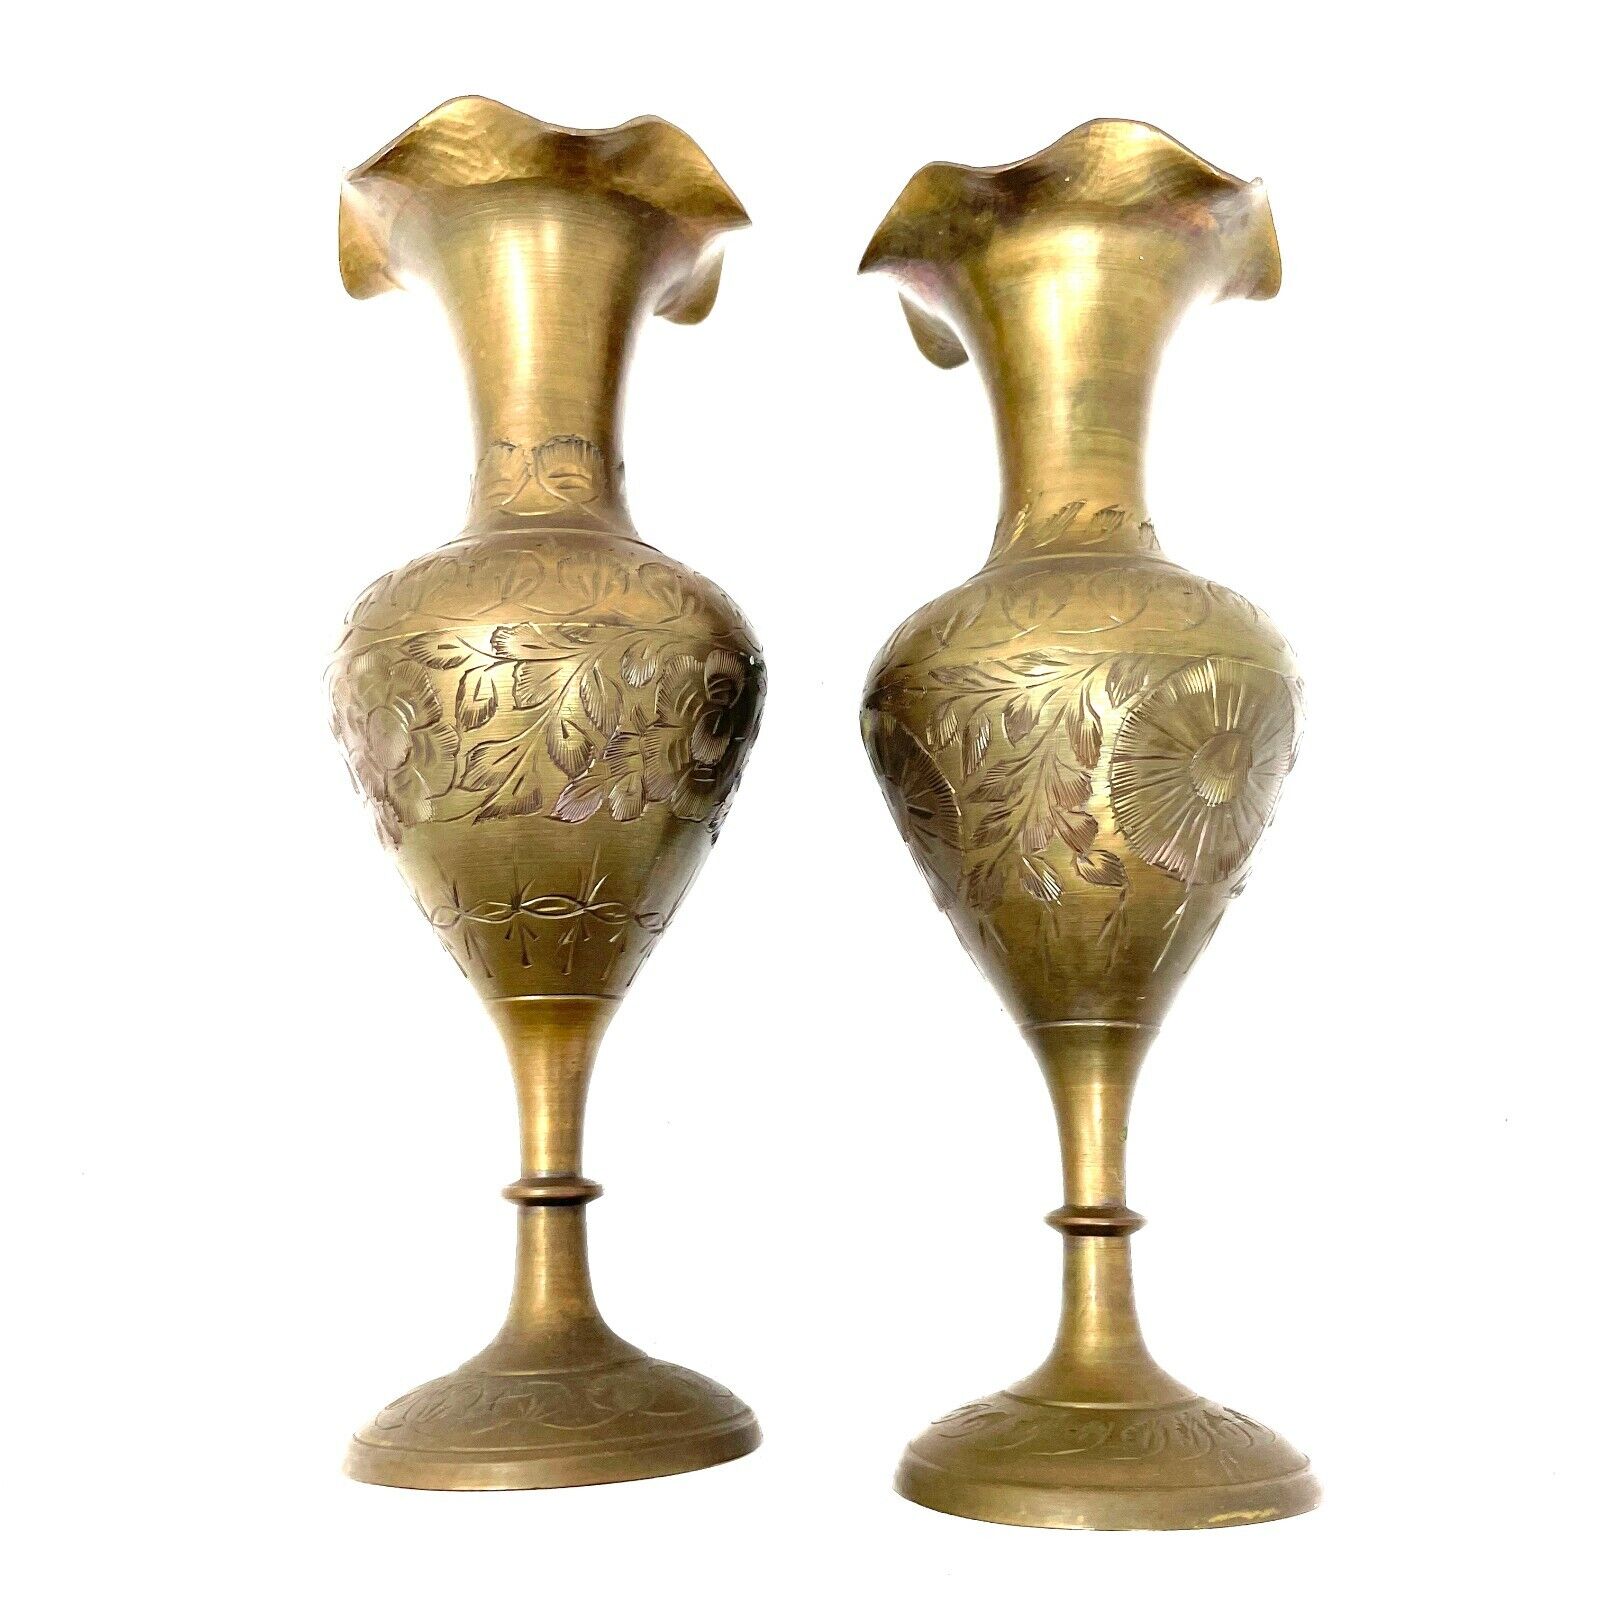 2 Pcs Vintage Solid Brass 9 in Vases, Decorative Collectibles, Floral Theme